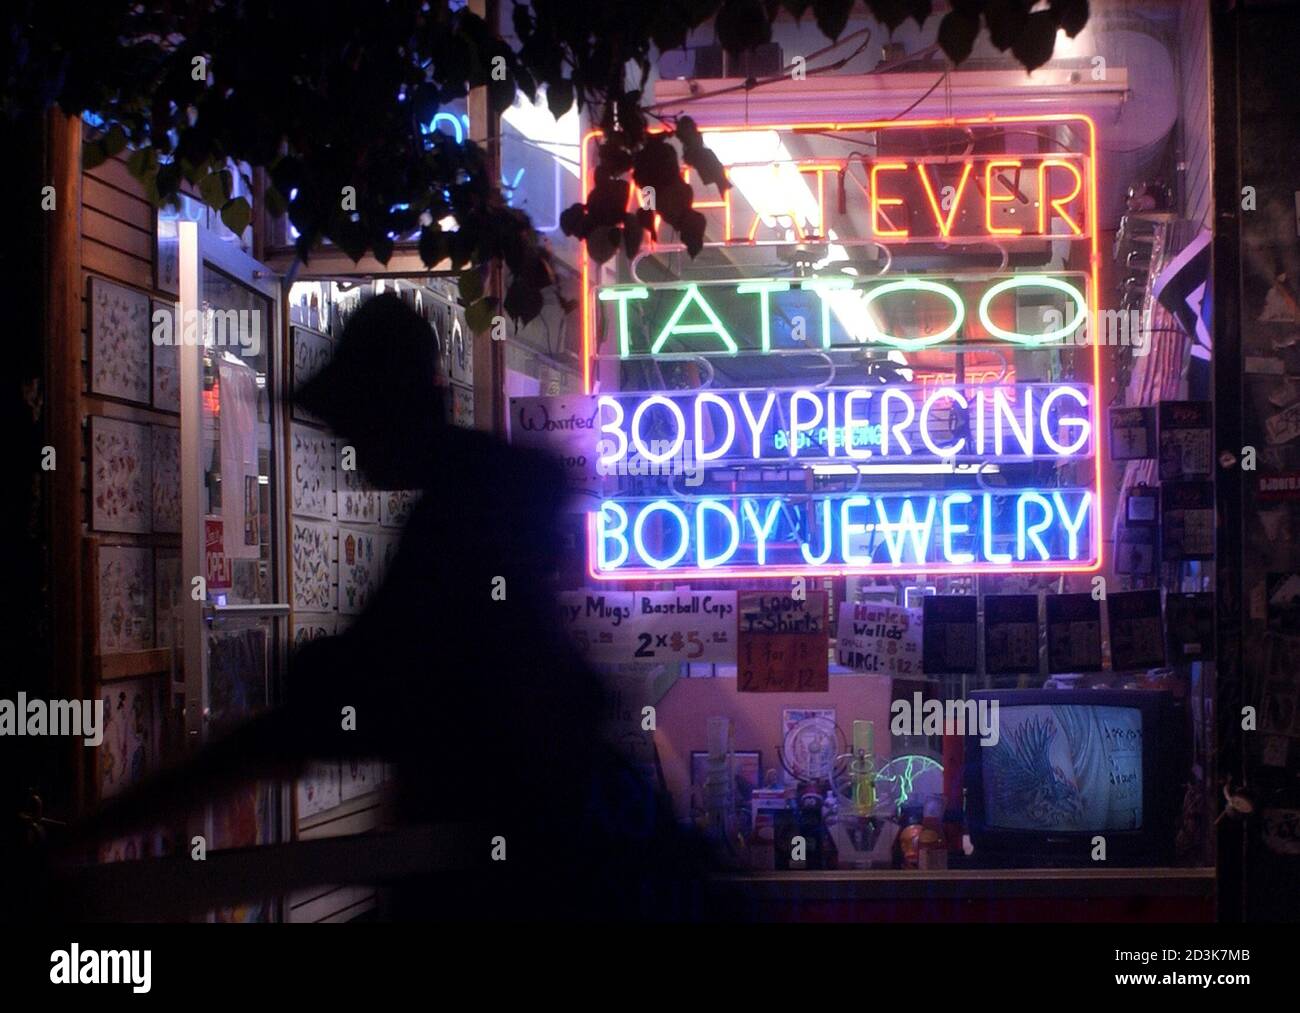 View of a tattoo and piercing shop in New York, May 27, 2003. The latest trend among teens and twentysomethings who indulge in so-called extreme body modification, forking one's tongue like a serpent's 'is an art form,' said T.J. McGillis, who offers the service for a $250 charge. REUTERS/Chip East REUTERS PP03060055  CME Stock Photo